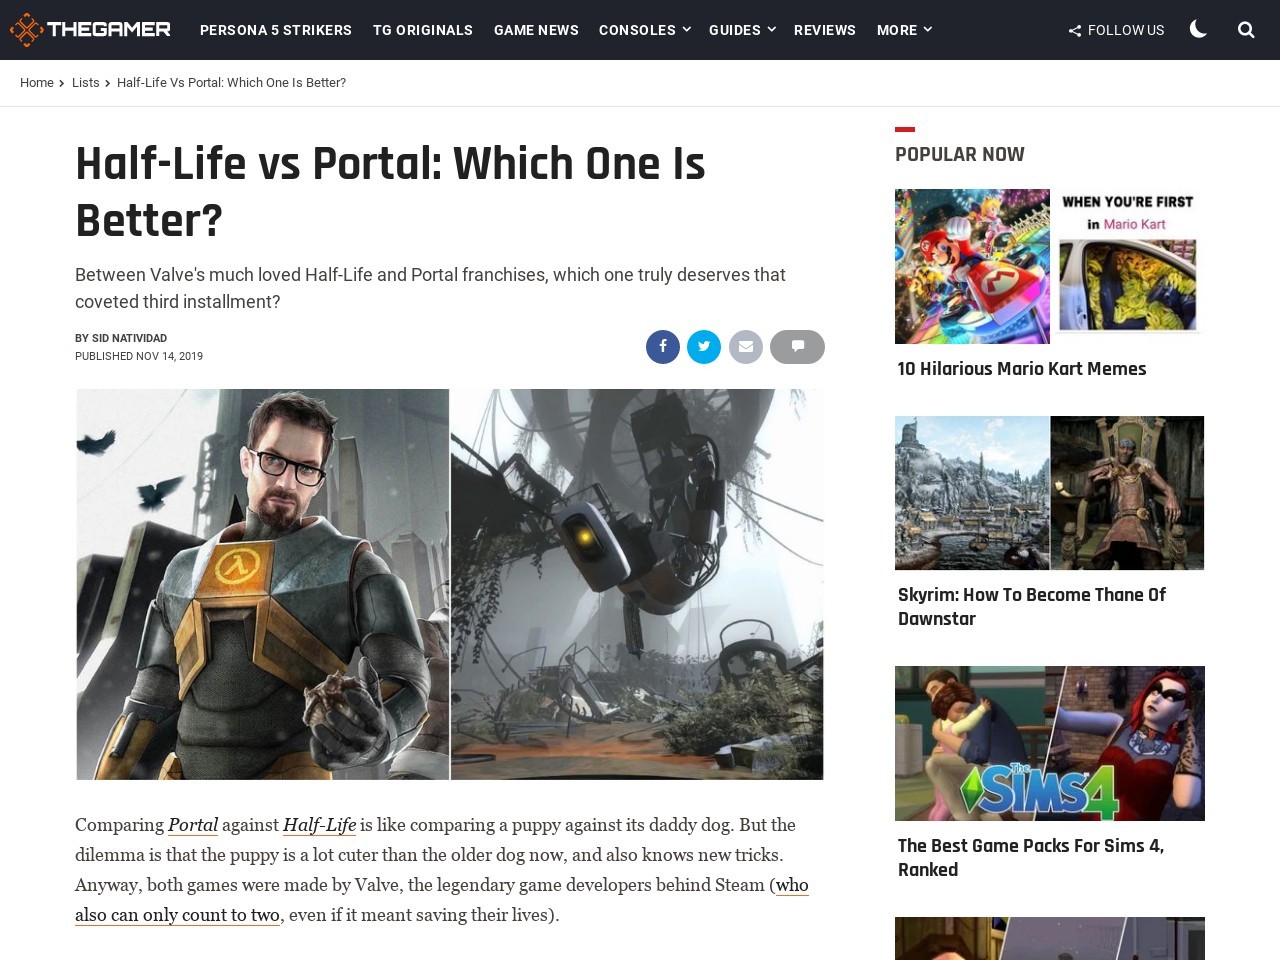 Half-Life vs Portal: Which One Is Better? | TheGamer